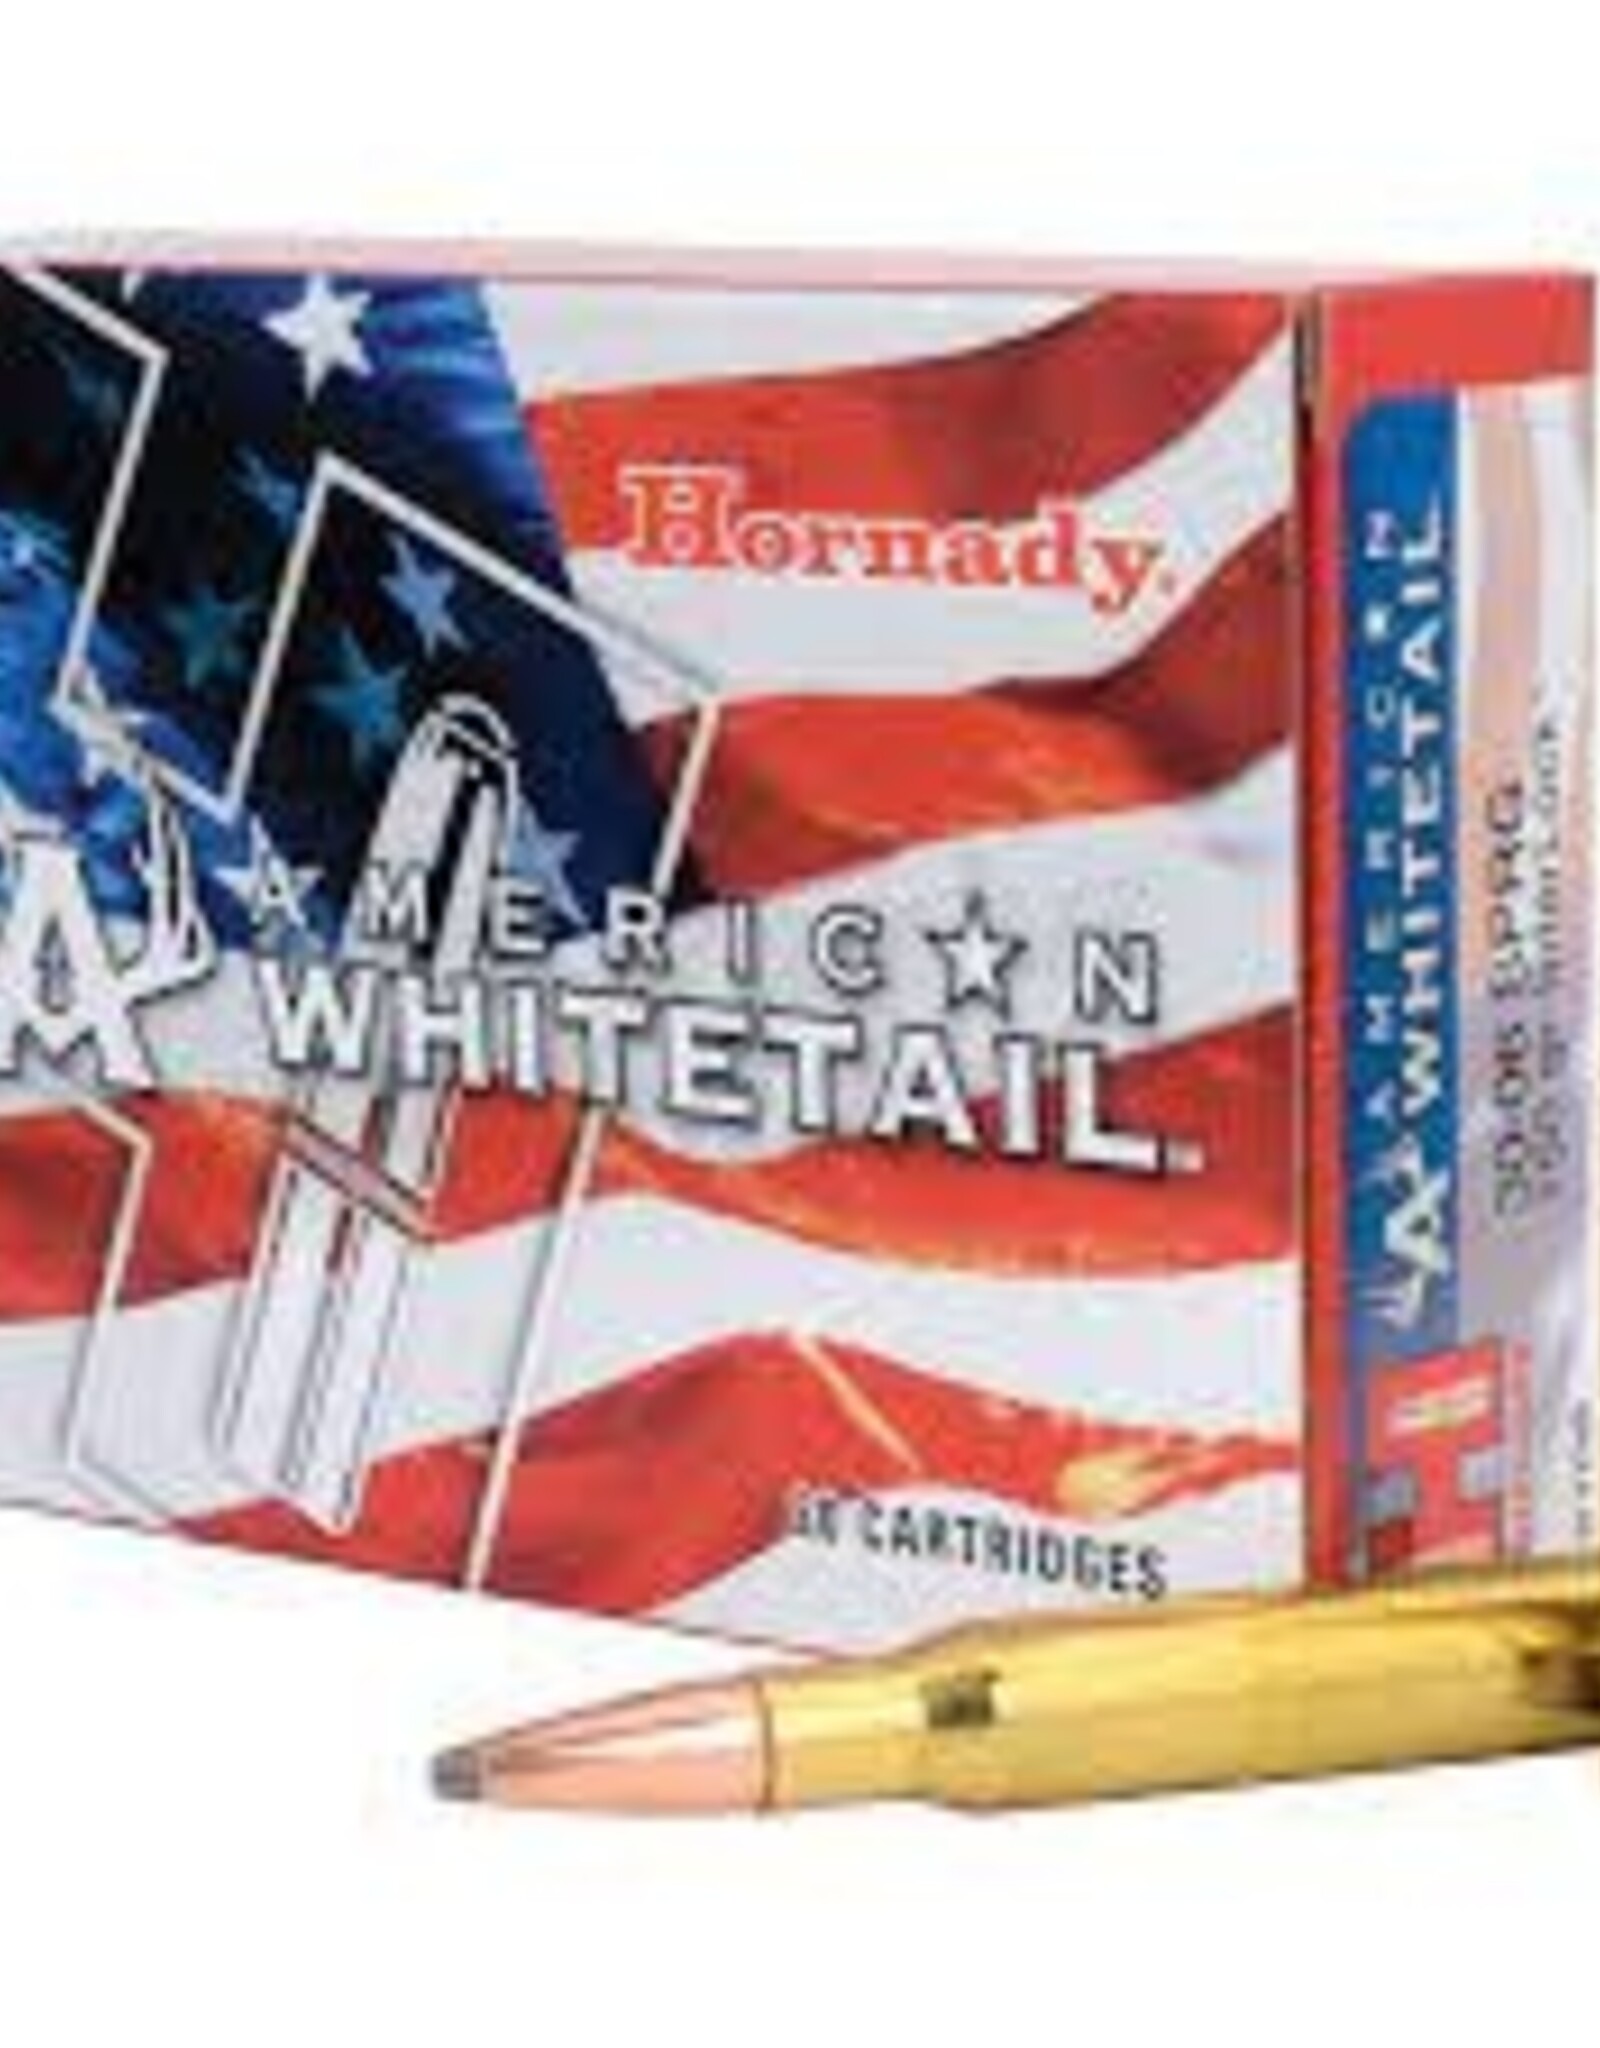 HORNADY AMERICAN WHITETAIL